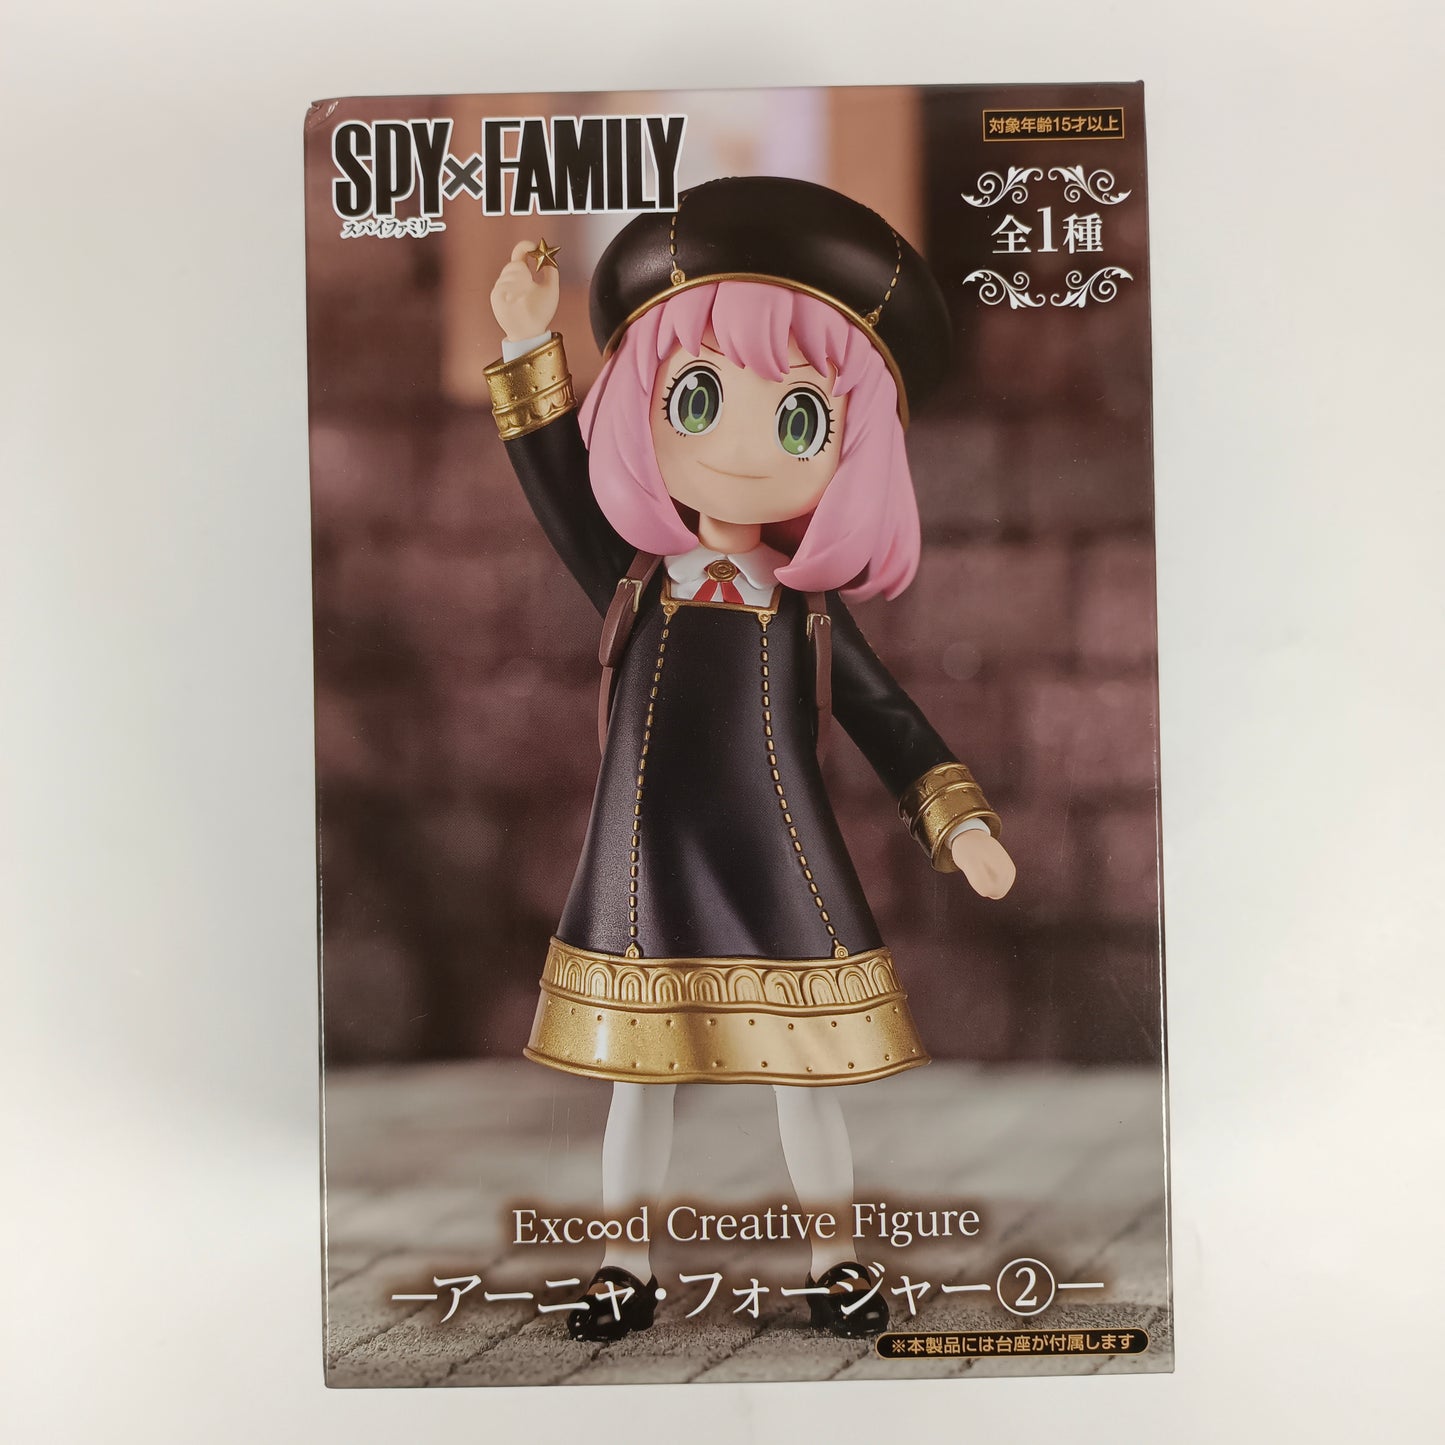 SPY×FAMILY" - Exc∞d Creative Figure - Anya Forger 2 -